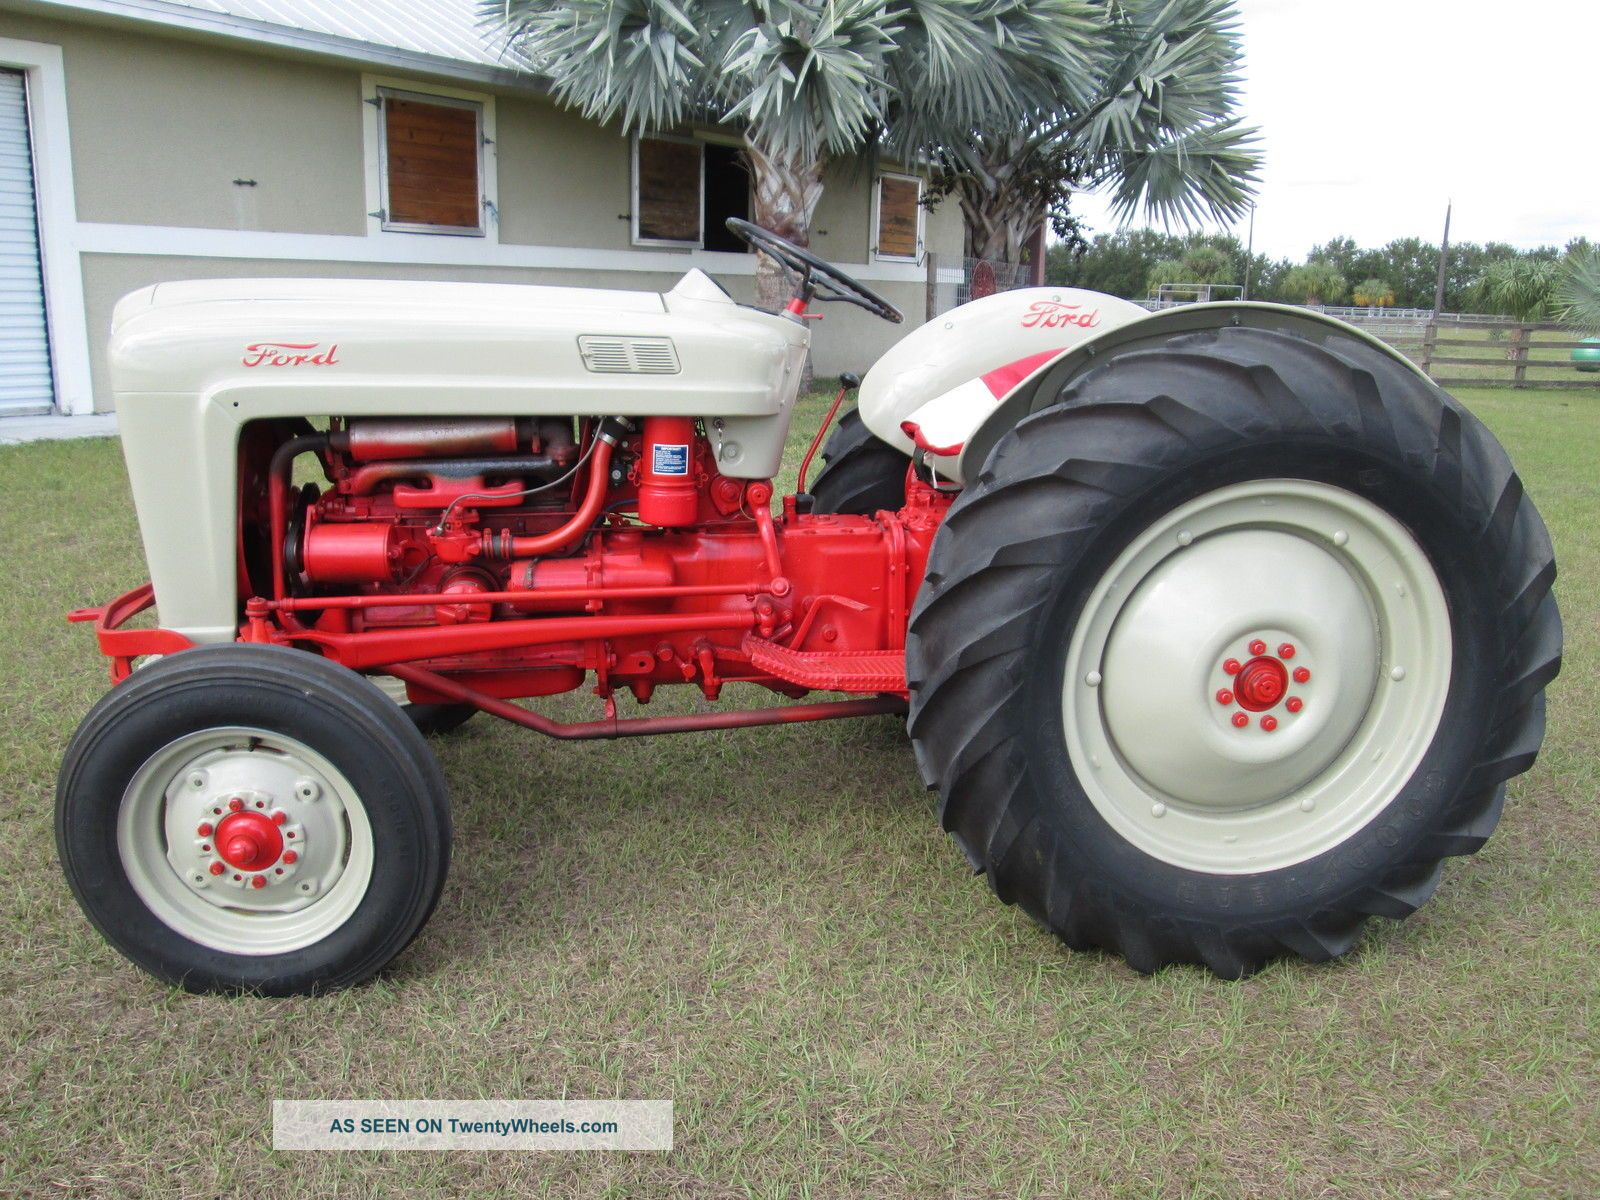 1953 Ford jubilee tractor specs #4